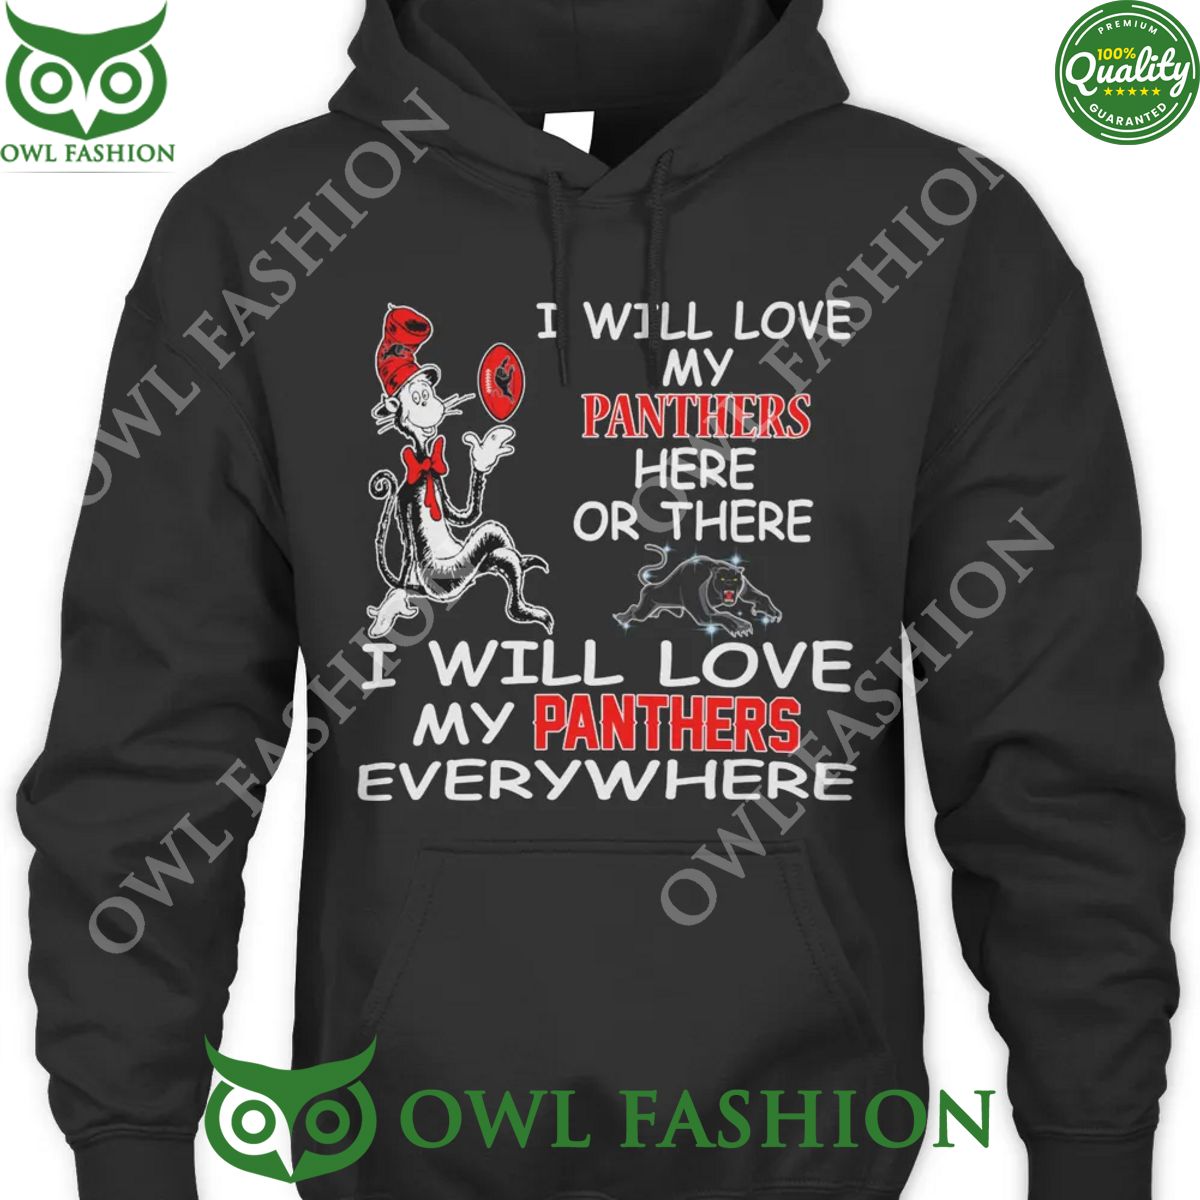 i will love my panthers here or there i will love panthers everywhere t shirt 1 bDZRP.jpg